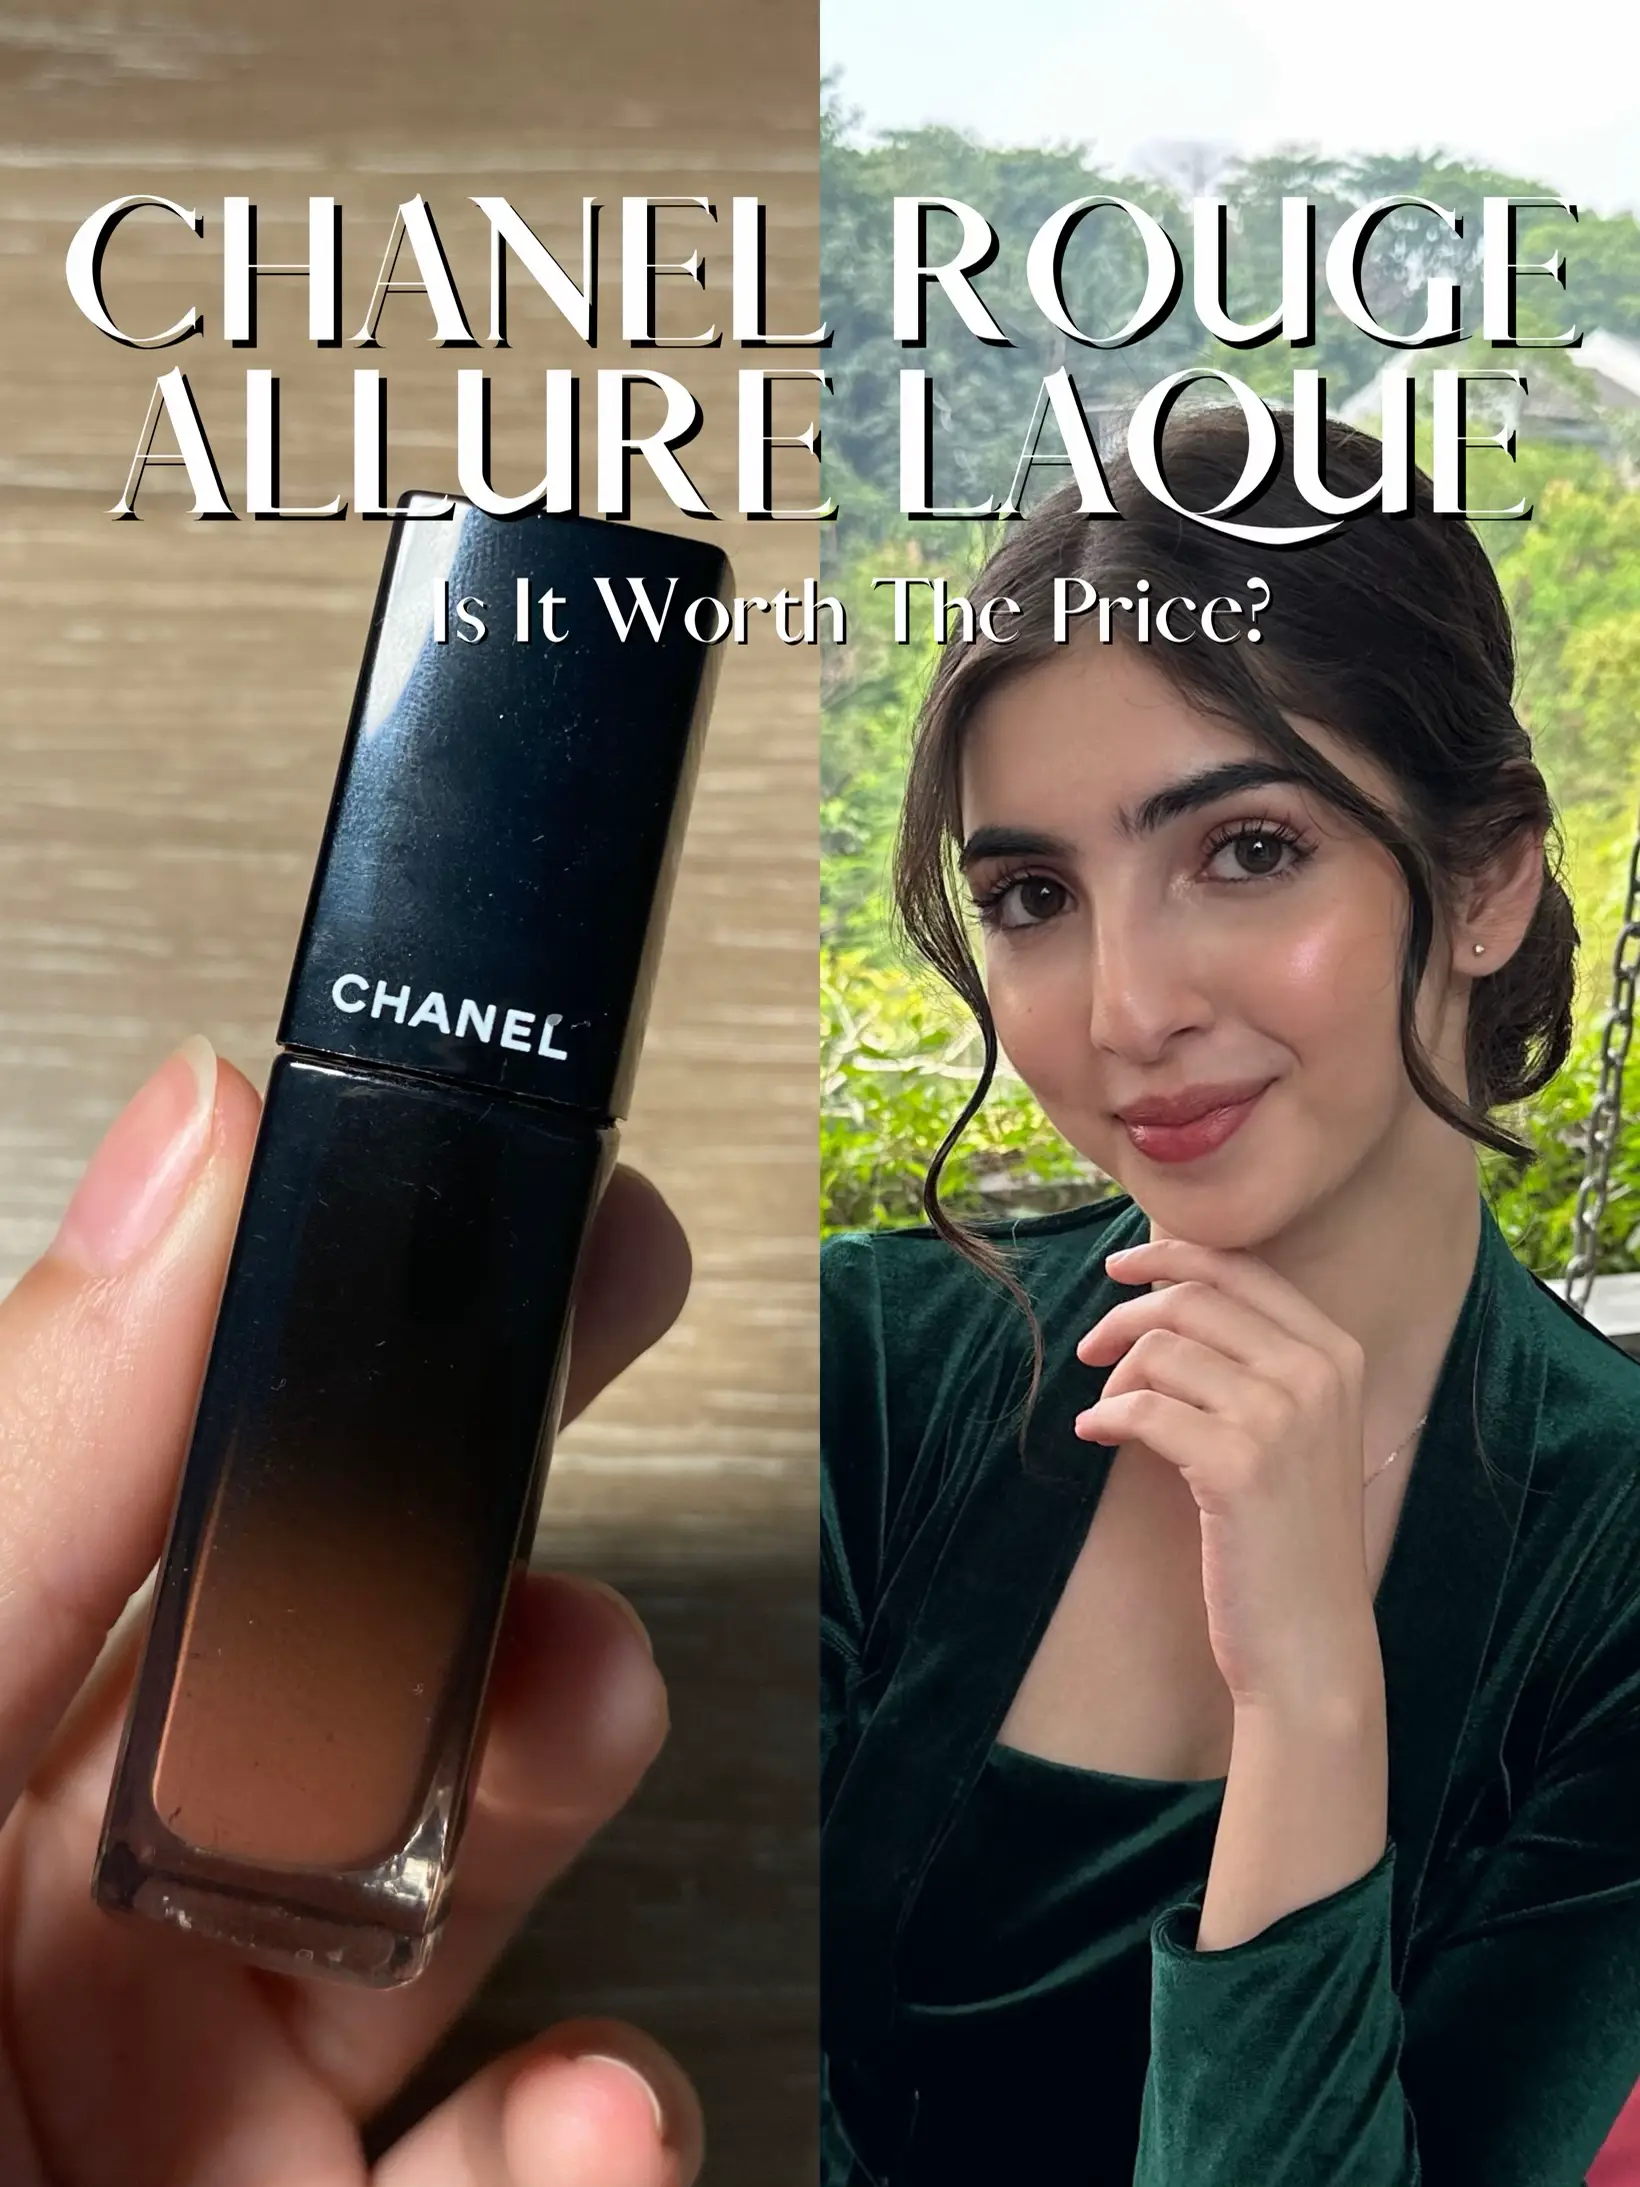 Chanel Rouge Allure Laque: Is It Worth The Price?, Gallery posted by  friankhaurellia